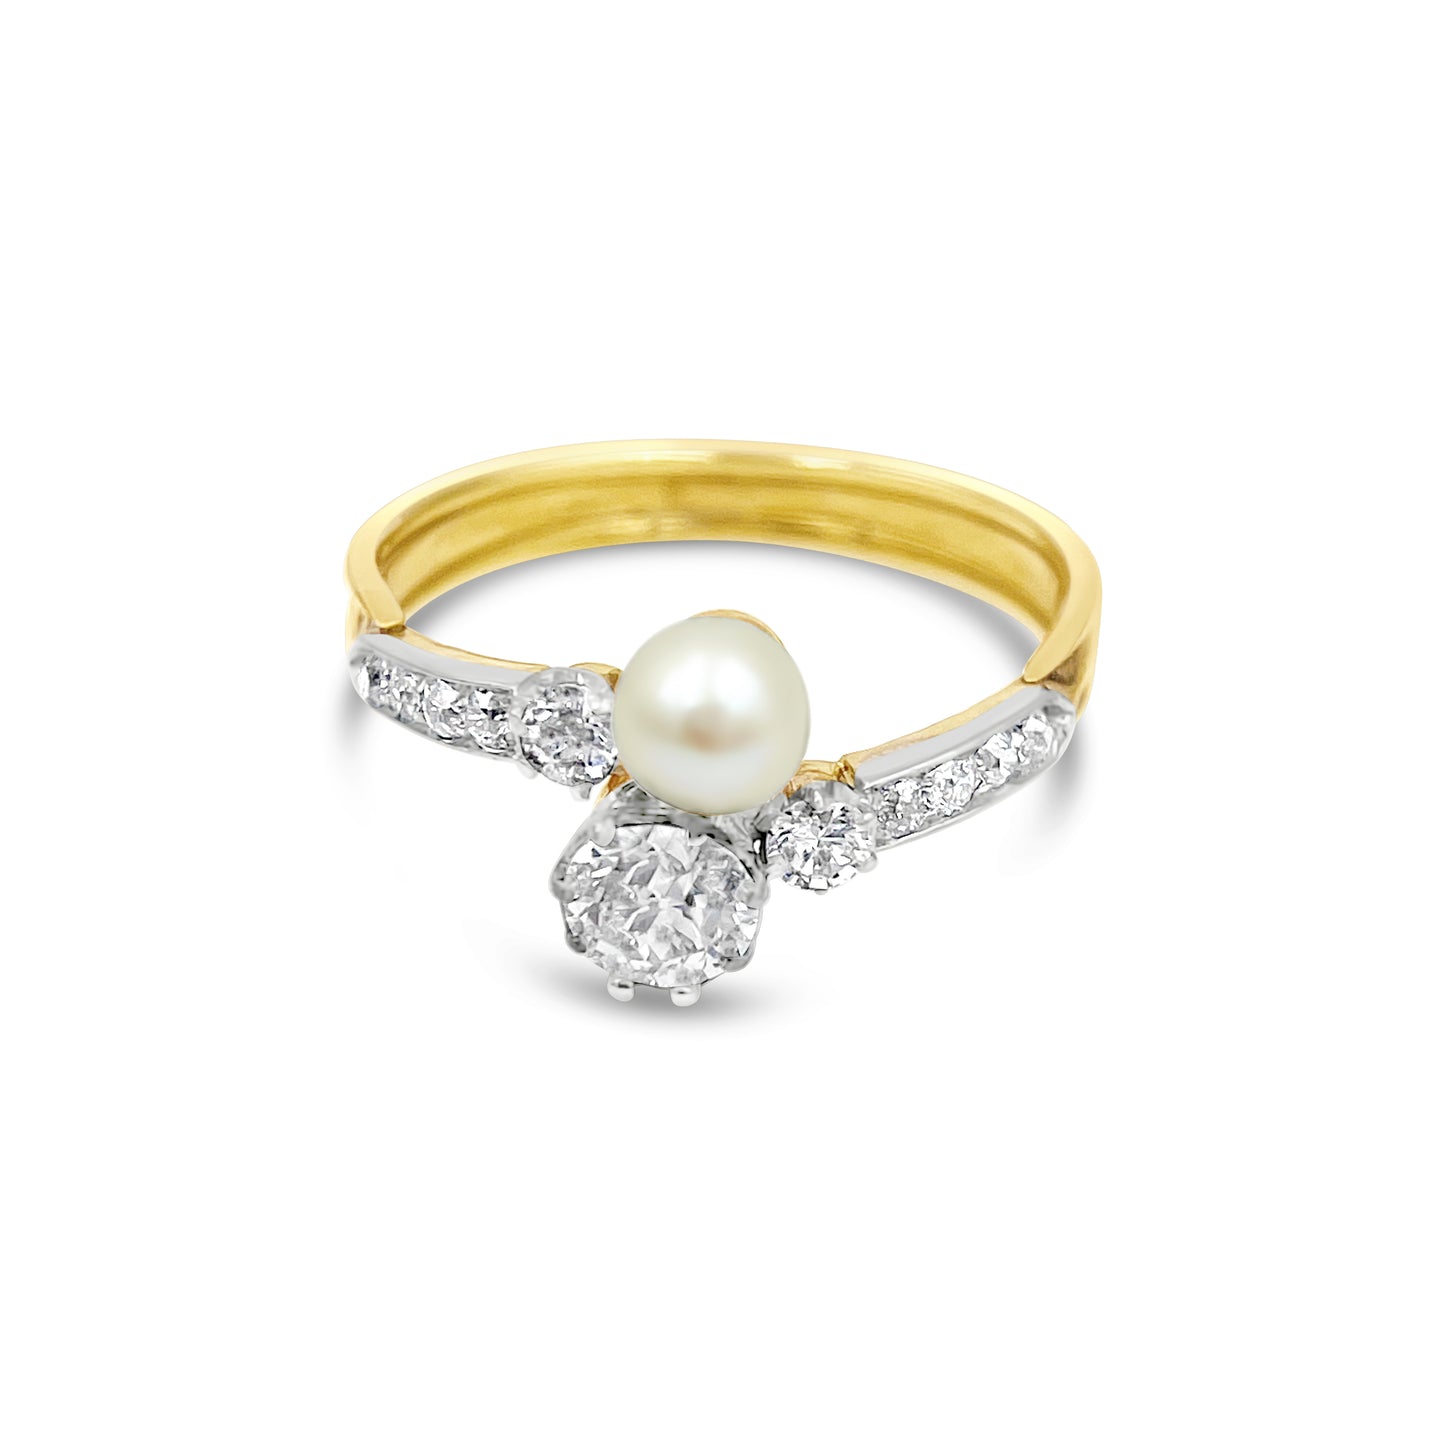 Ring set with round brilliant diamonds and accent pearl  - Yellow Gold - Bodega